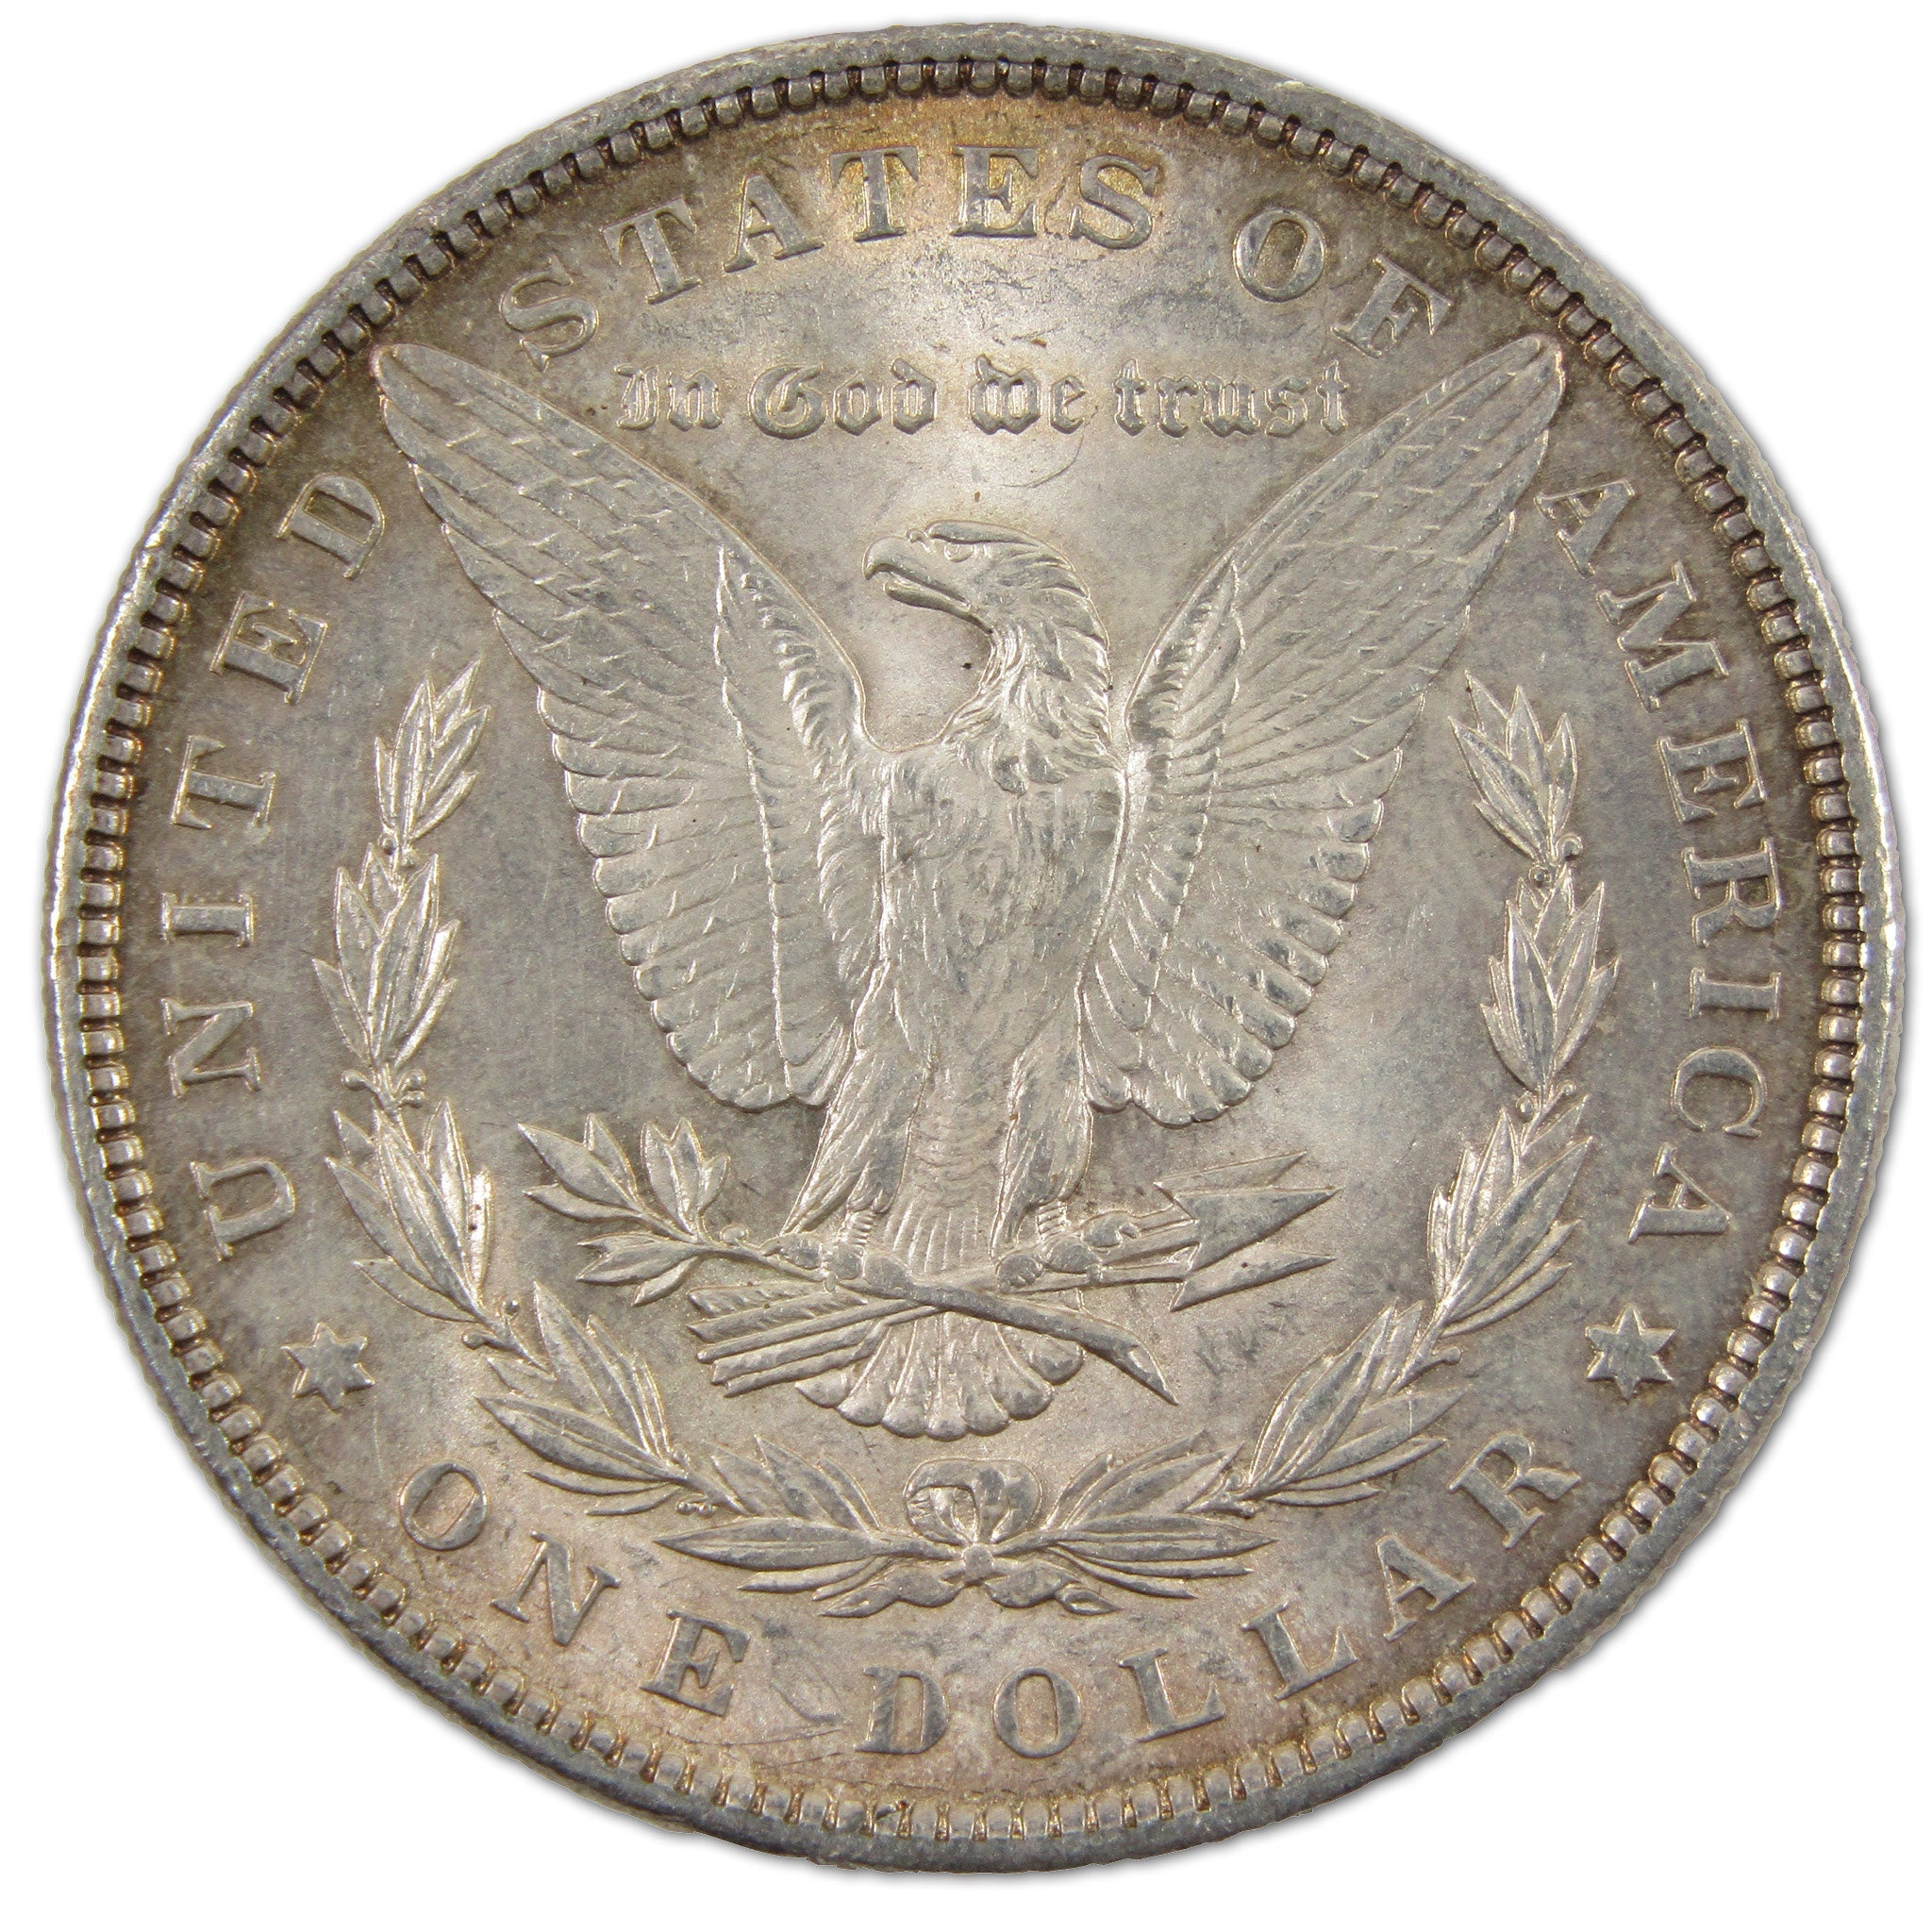 1896 Morgan Dollar AU About Uncirculated Silver $1 Coin SKU:I10764 - Morgan coin - Morgan silver dollar - Morgan silver dollar for sale - Profile Coins &amp; Collectibles